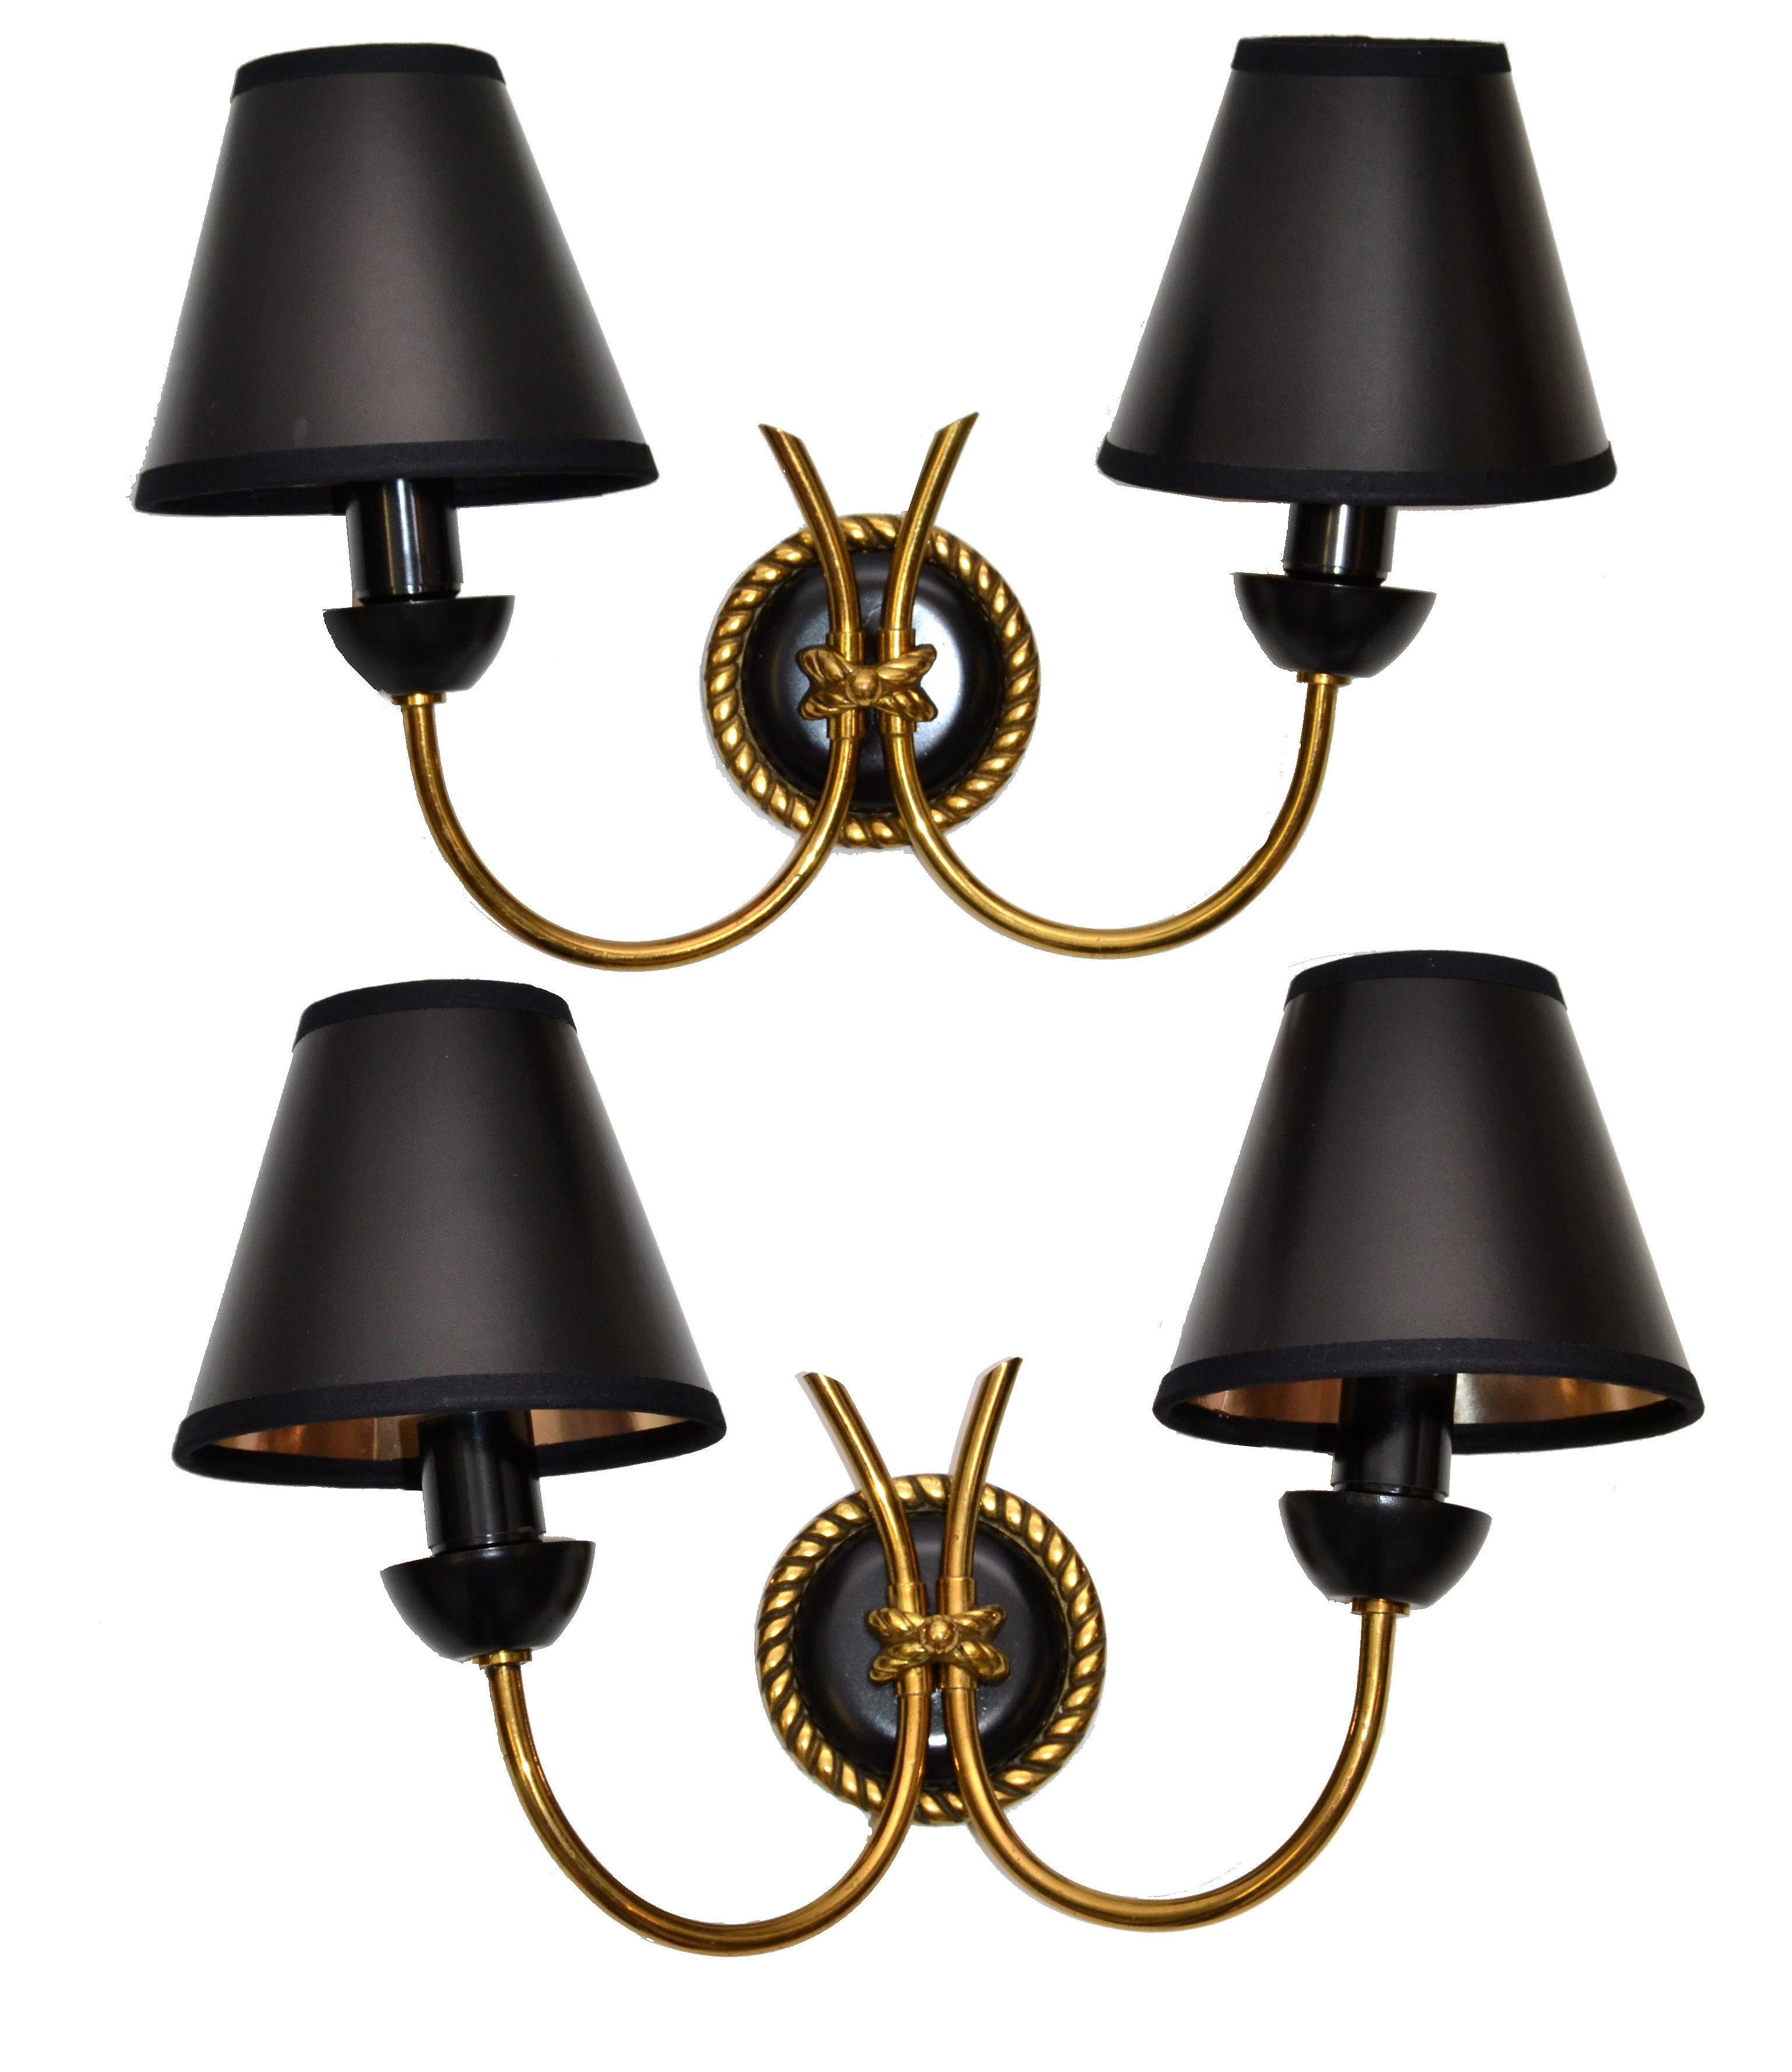 Elegant neoclassical pair of sconces, wall lamps in brass & gun metal by Maison Arlus, made in France.
The set comes with black and gold paper shades.
US Rewiring and each Sconce takes 2 light bulbs with max 40 watts, LED work too.
Back Plate